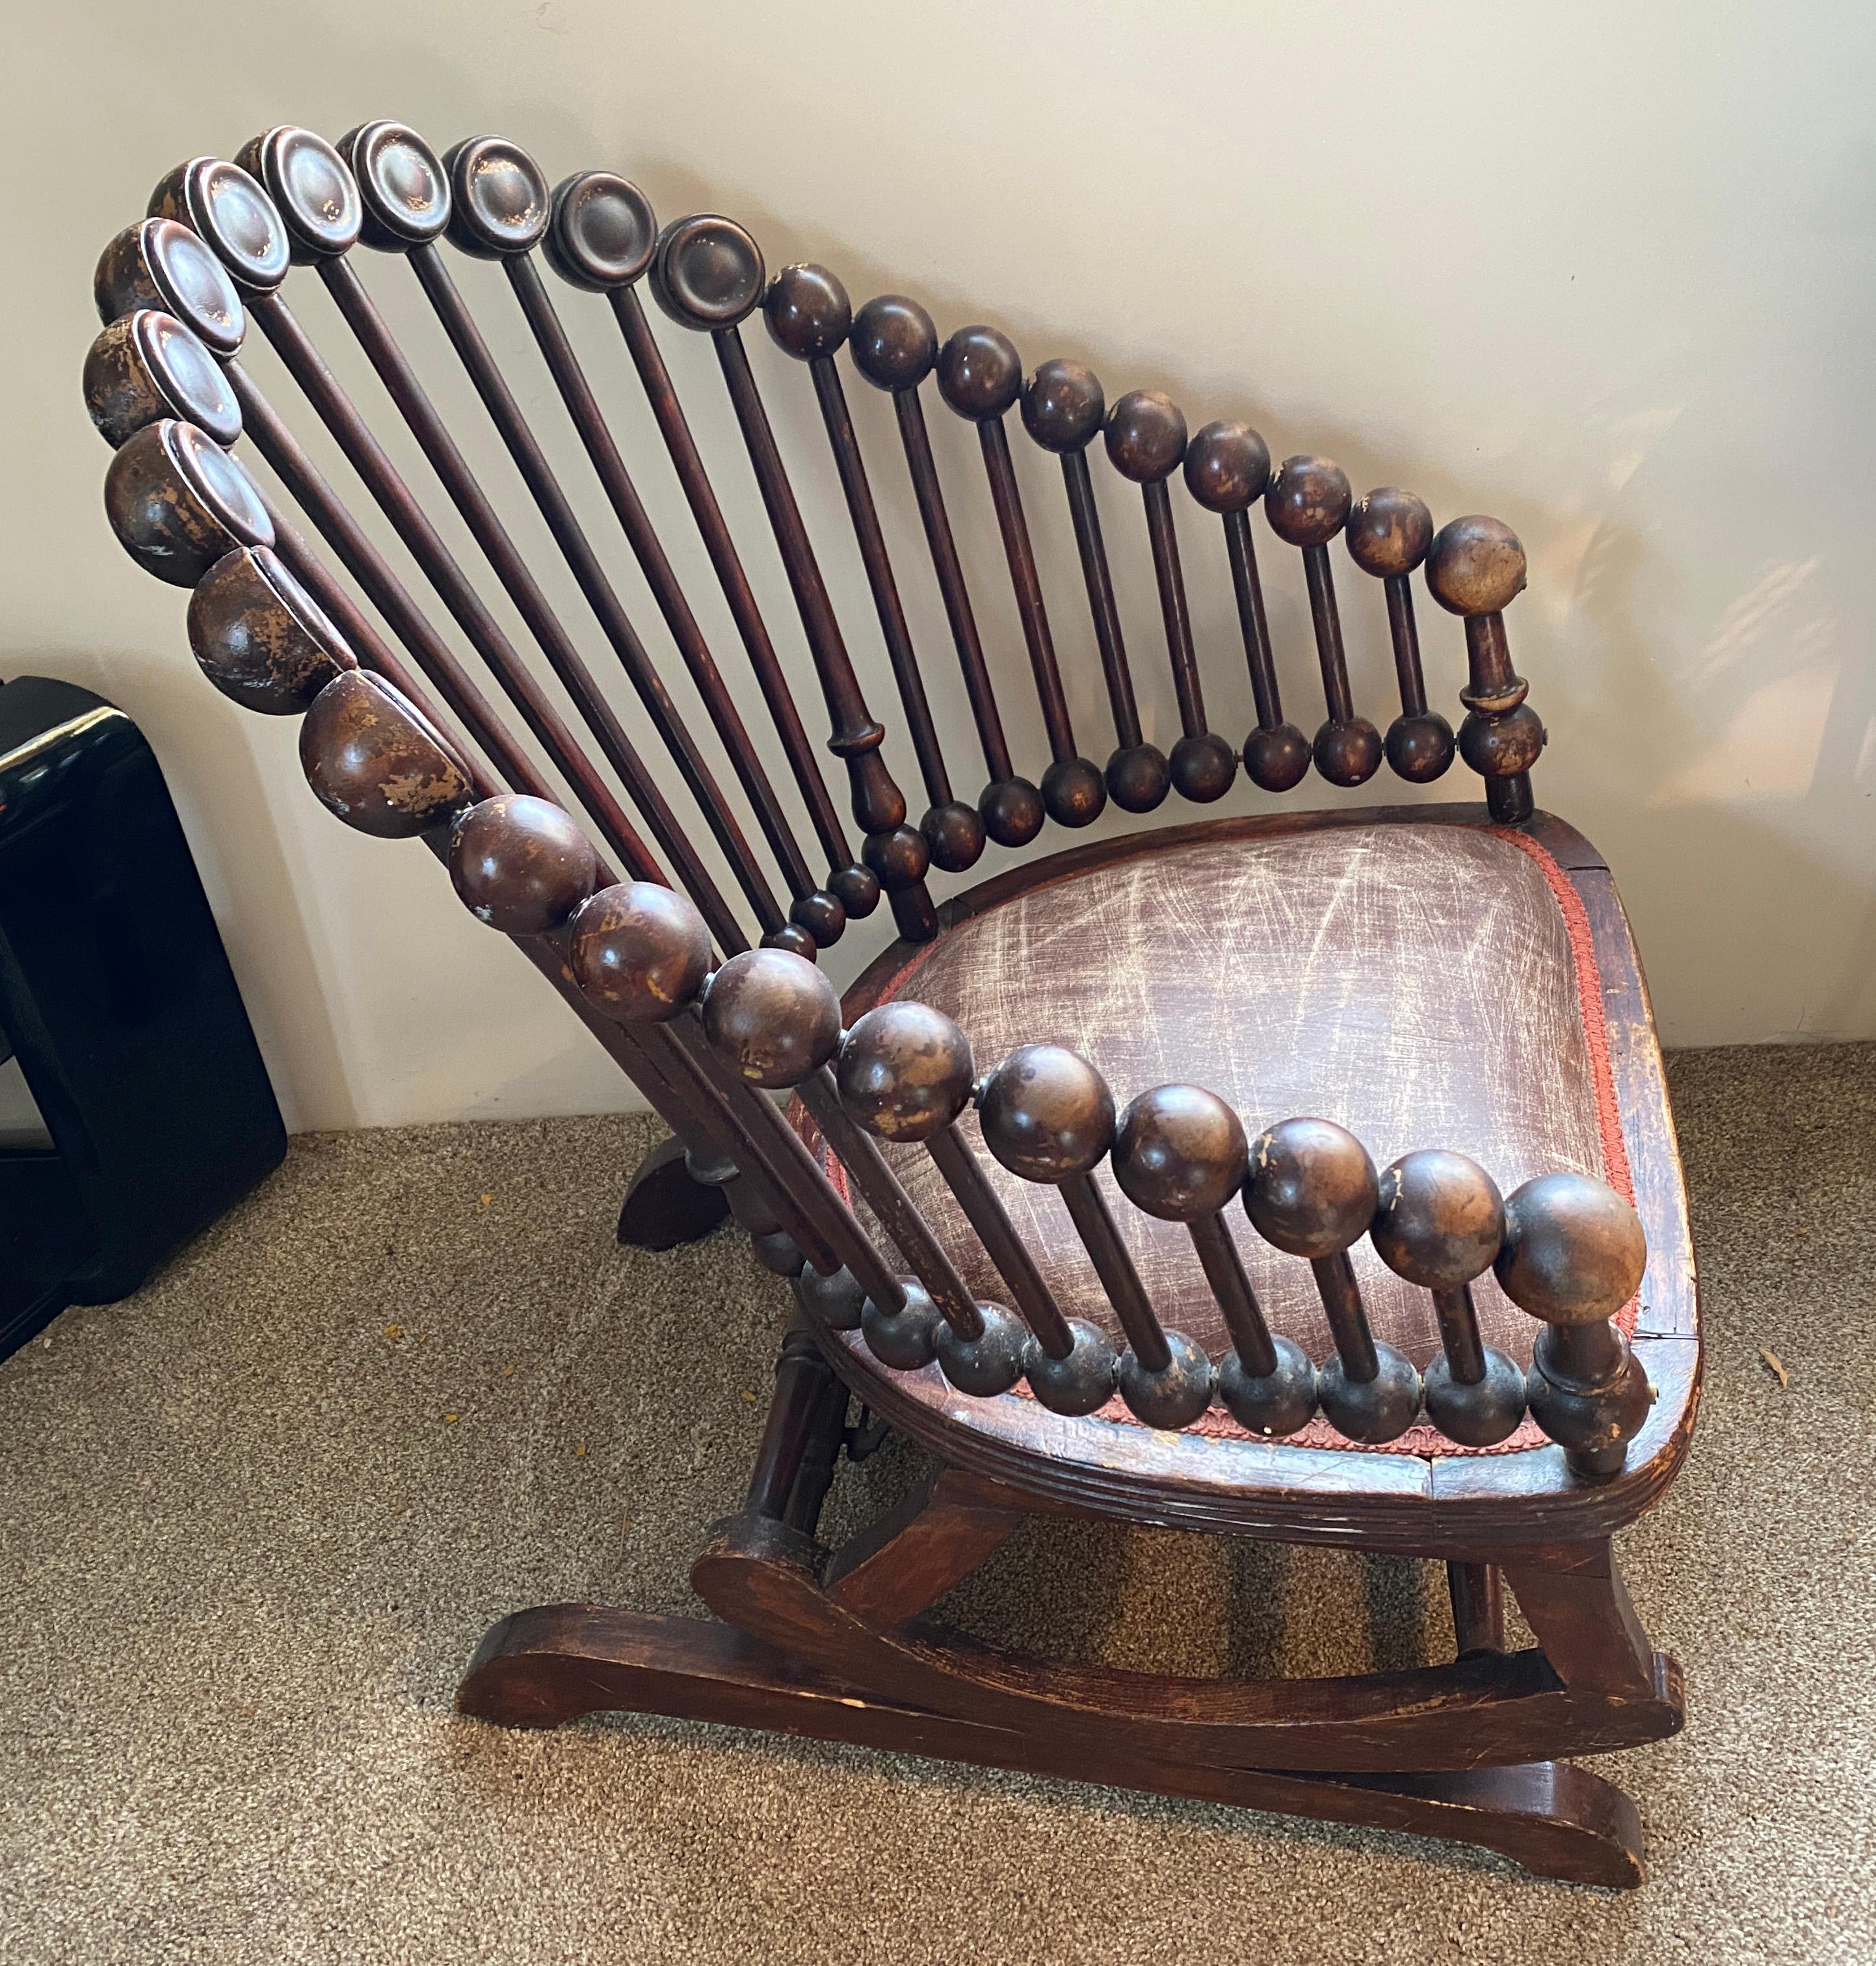 Store closing March 31.  Rare and phenomenal George Hunzinger lollipop rocking chair, circa 1885. The first stationery rocker ever. Carved and lacquered wood, enameled steel, upholstery, brass. The lollipop chair was a defining expression of the